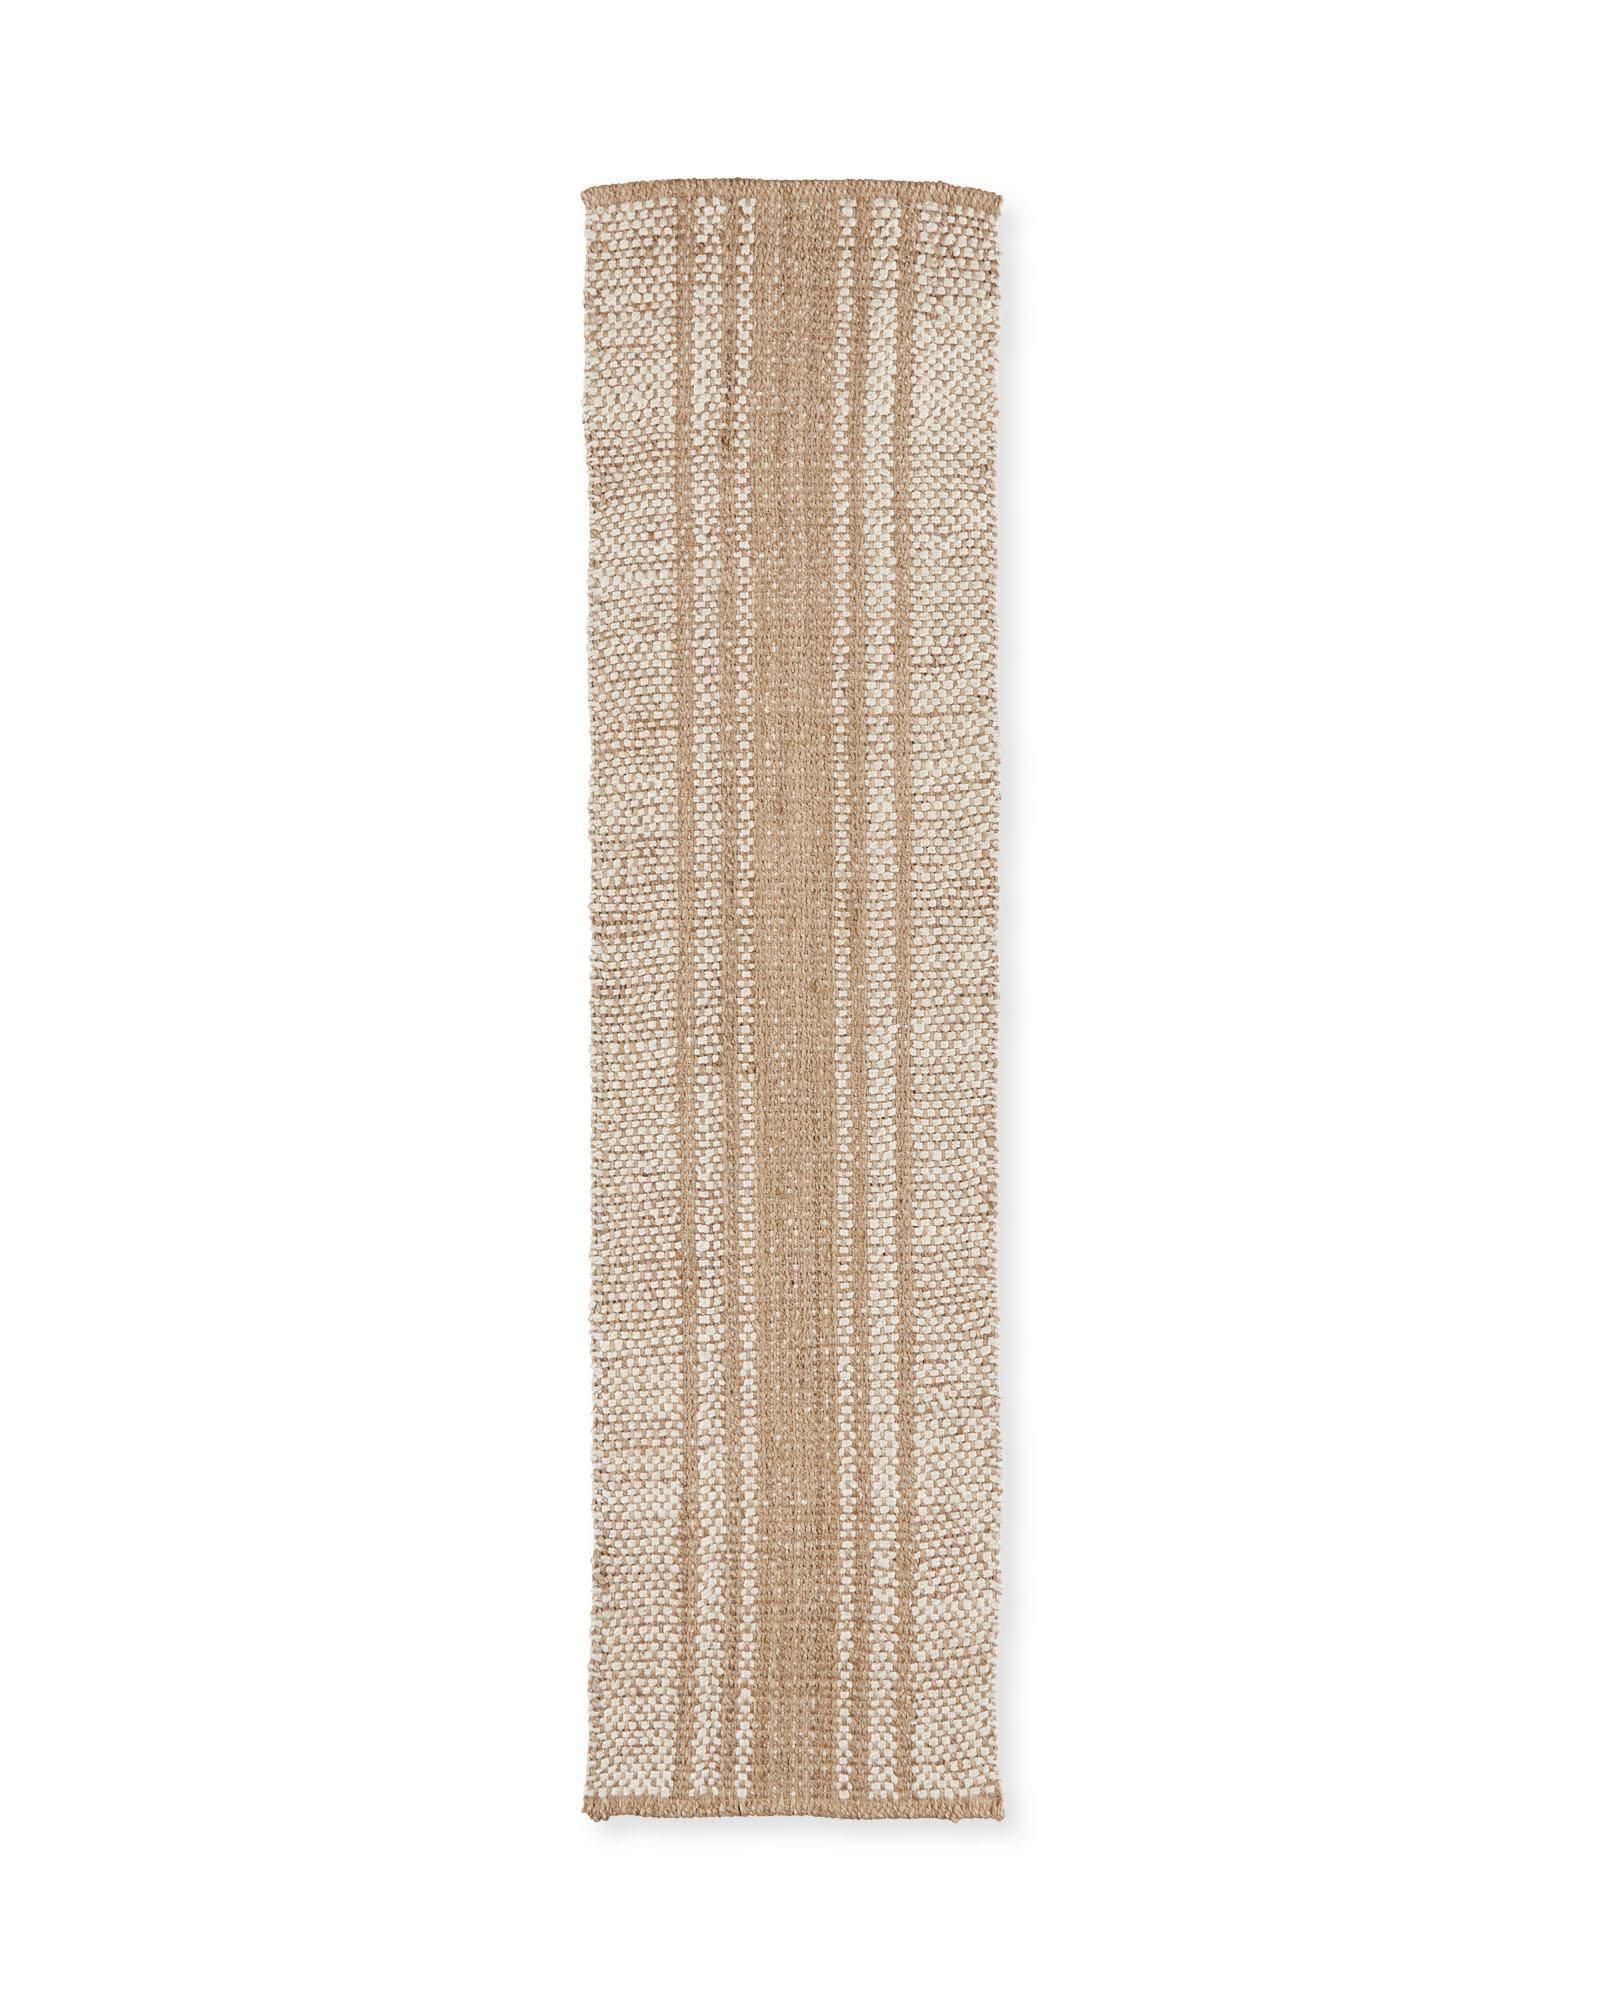 Striped Jute Mat | Serena and Lily